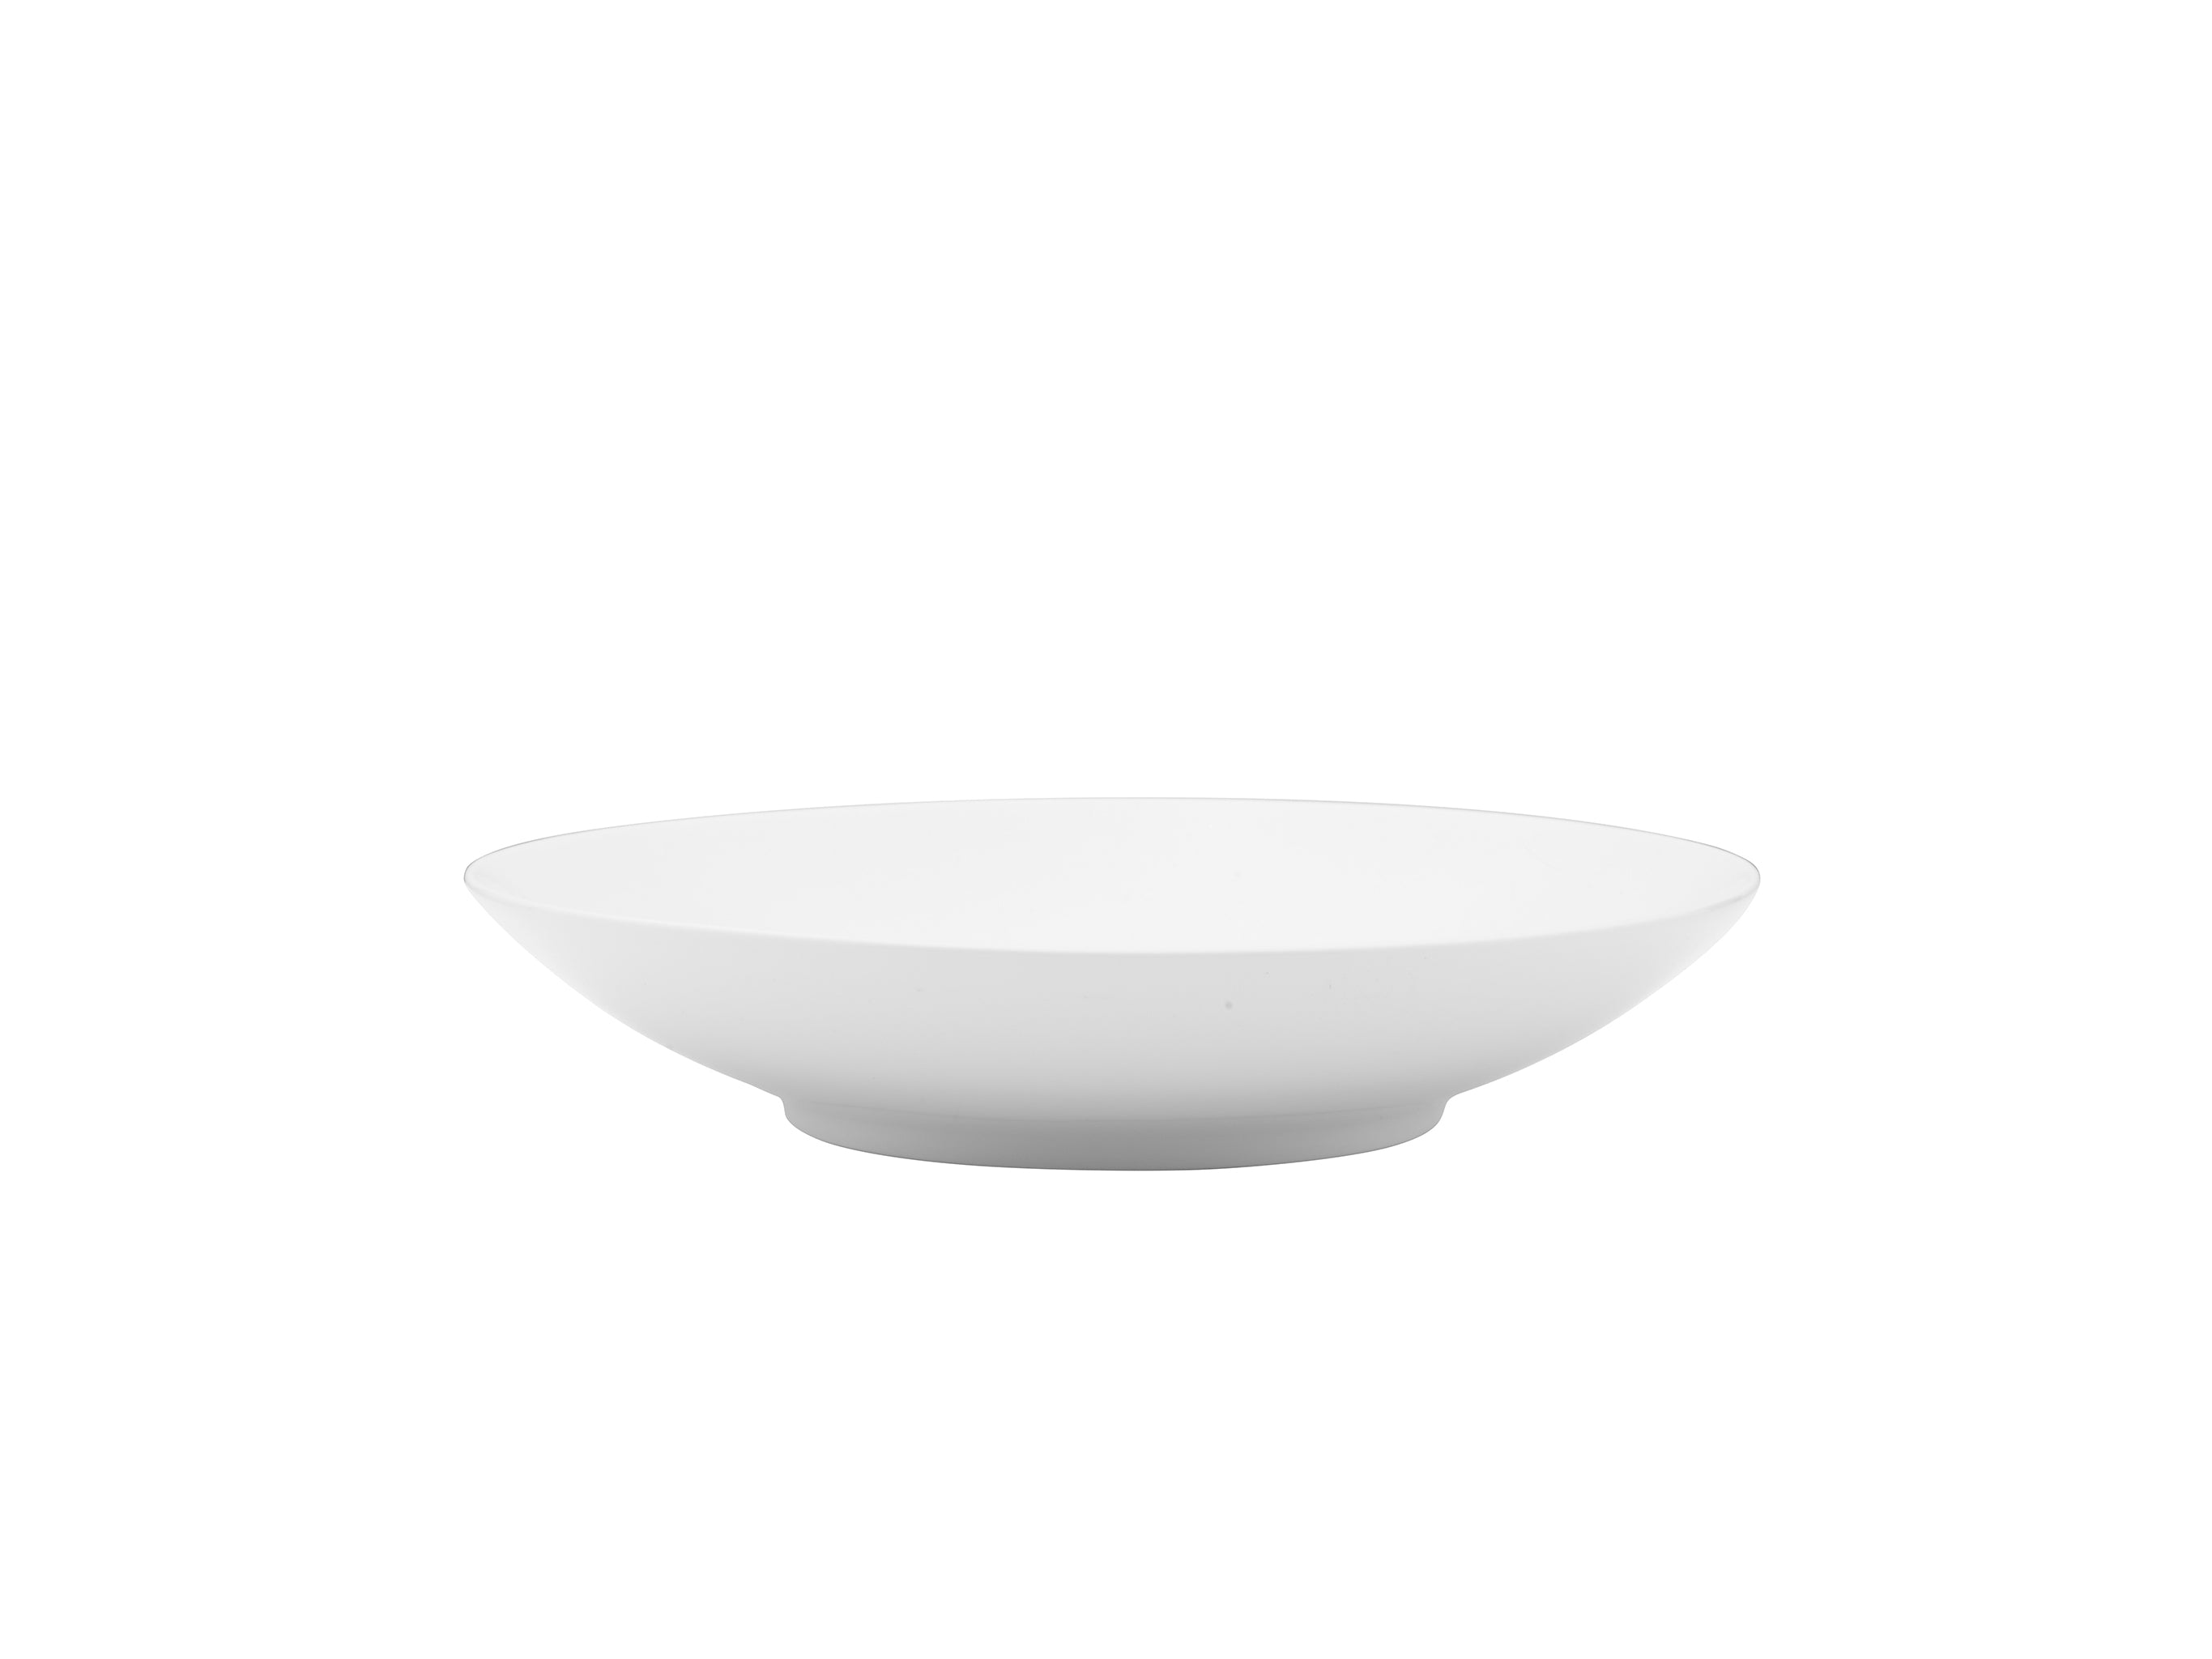 Galleria Porcelain Deep Coupe Plate 8" White